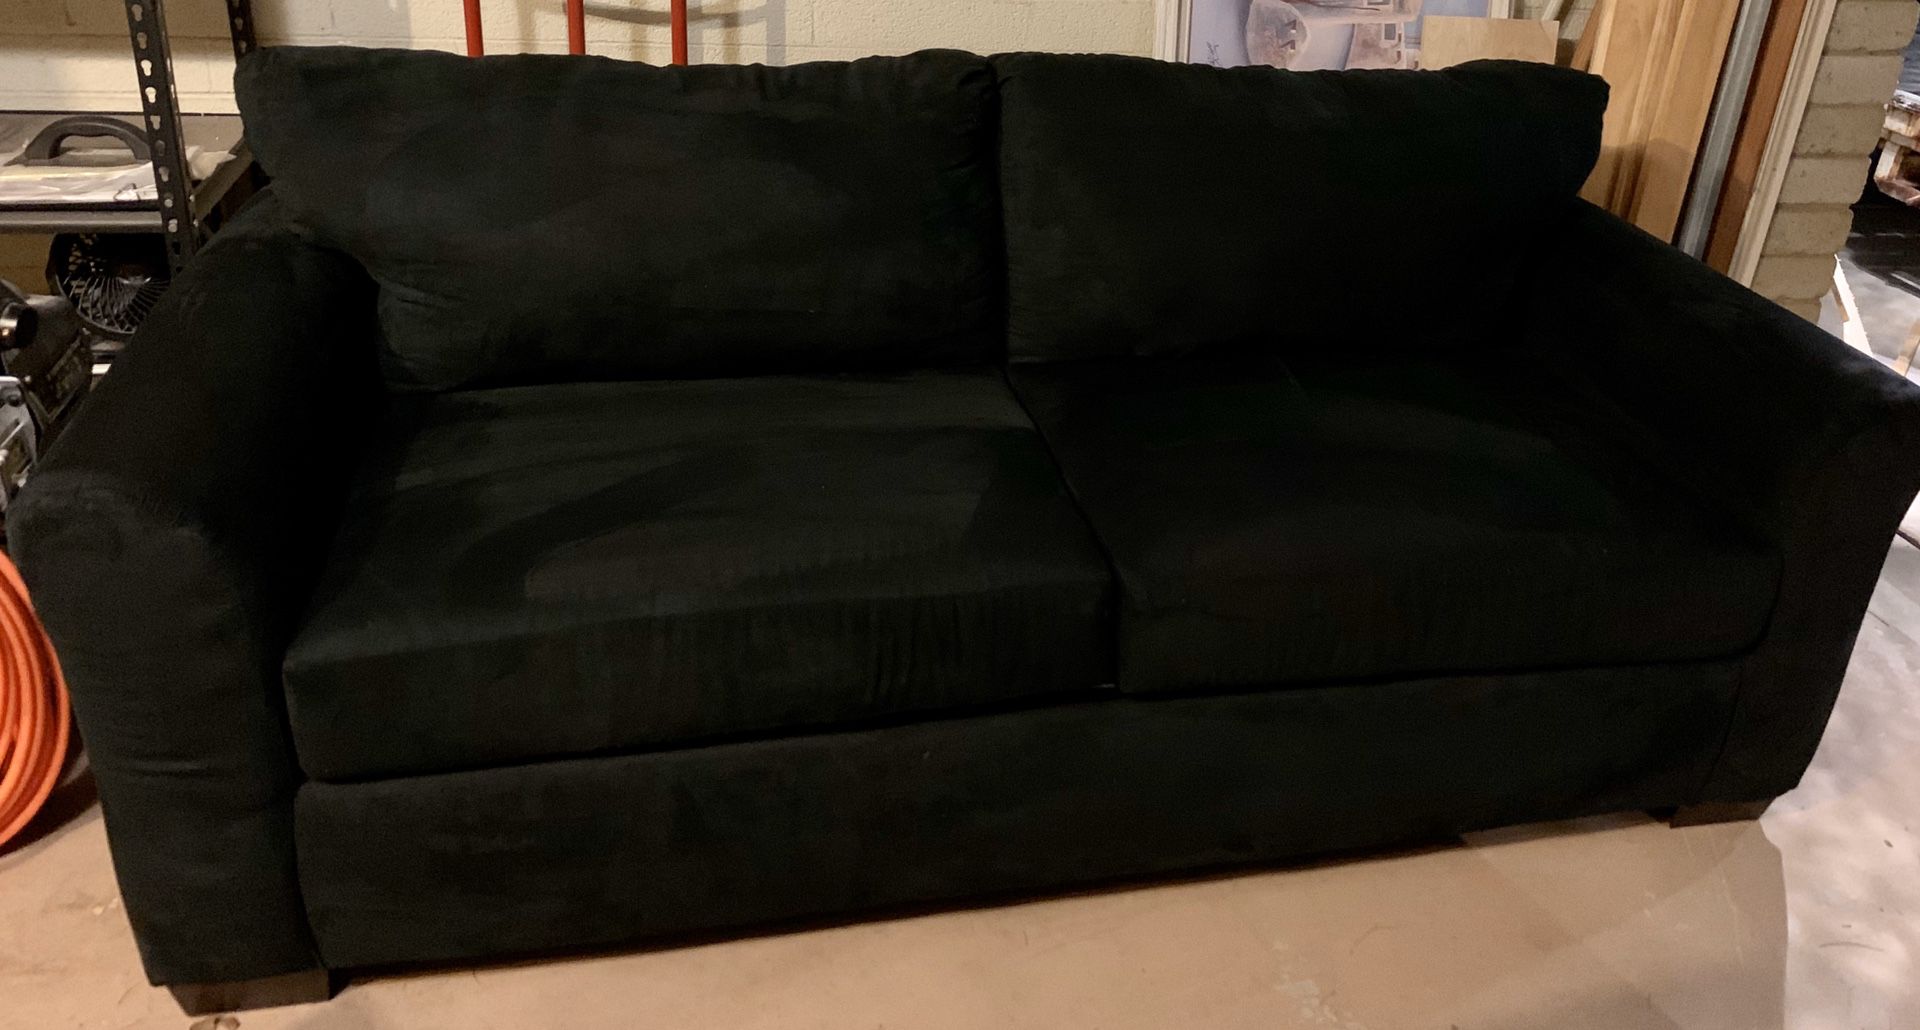 Like New Microfiber Sleeper Sofa/Sofa Bed/Pull-Out Couch - Black